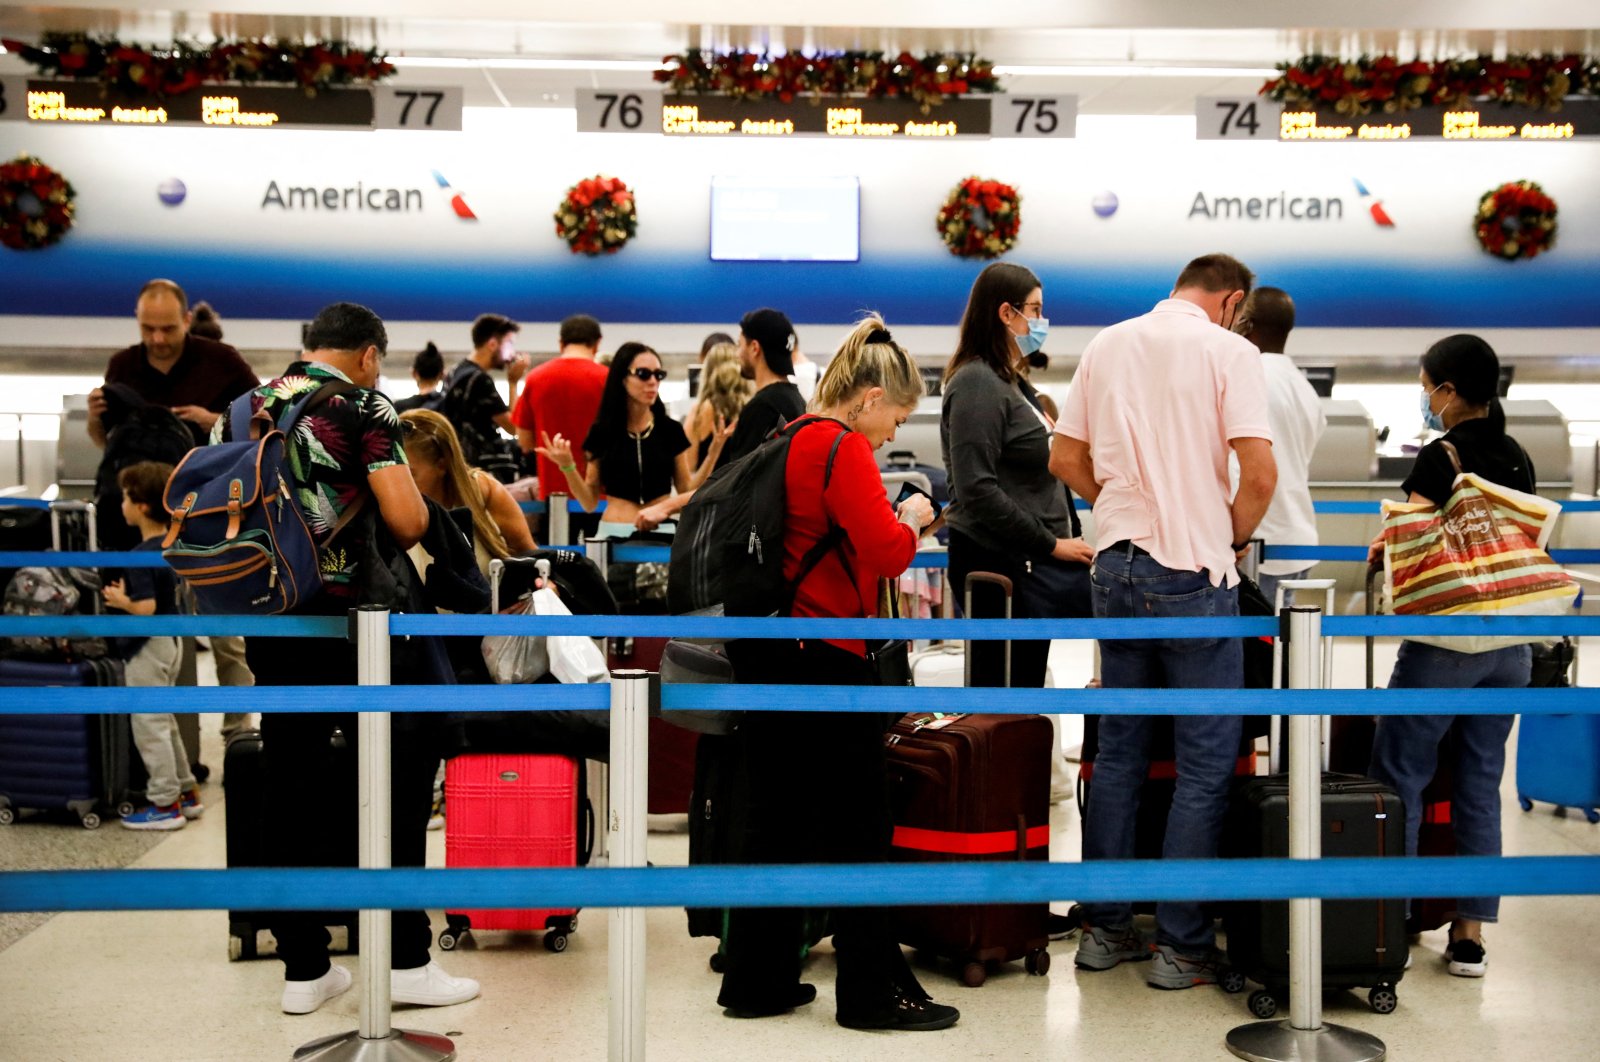 Travelers queue to check in for their flights at Miami International Airport after the Federal Aviation Administration (FAA) said it had slowed the volume of airplane traffic over Florida due to an air traffic computer issue, in Miami, Florida, U.S. Jan. 2, 2023. (Reuters Photo)